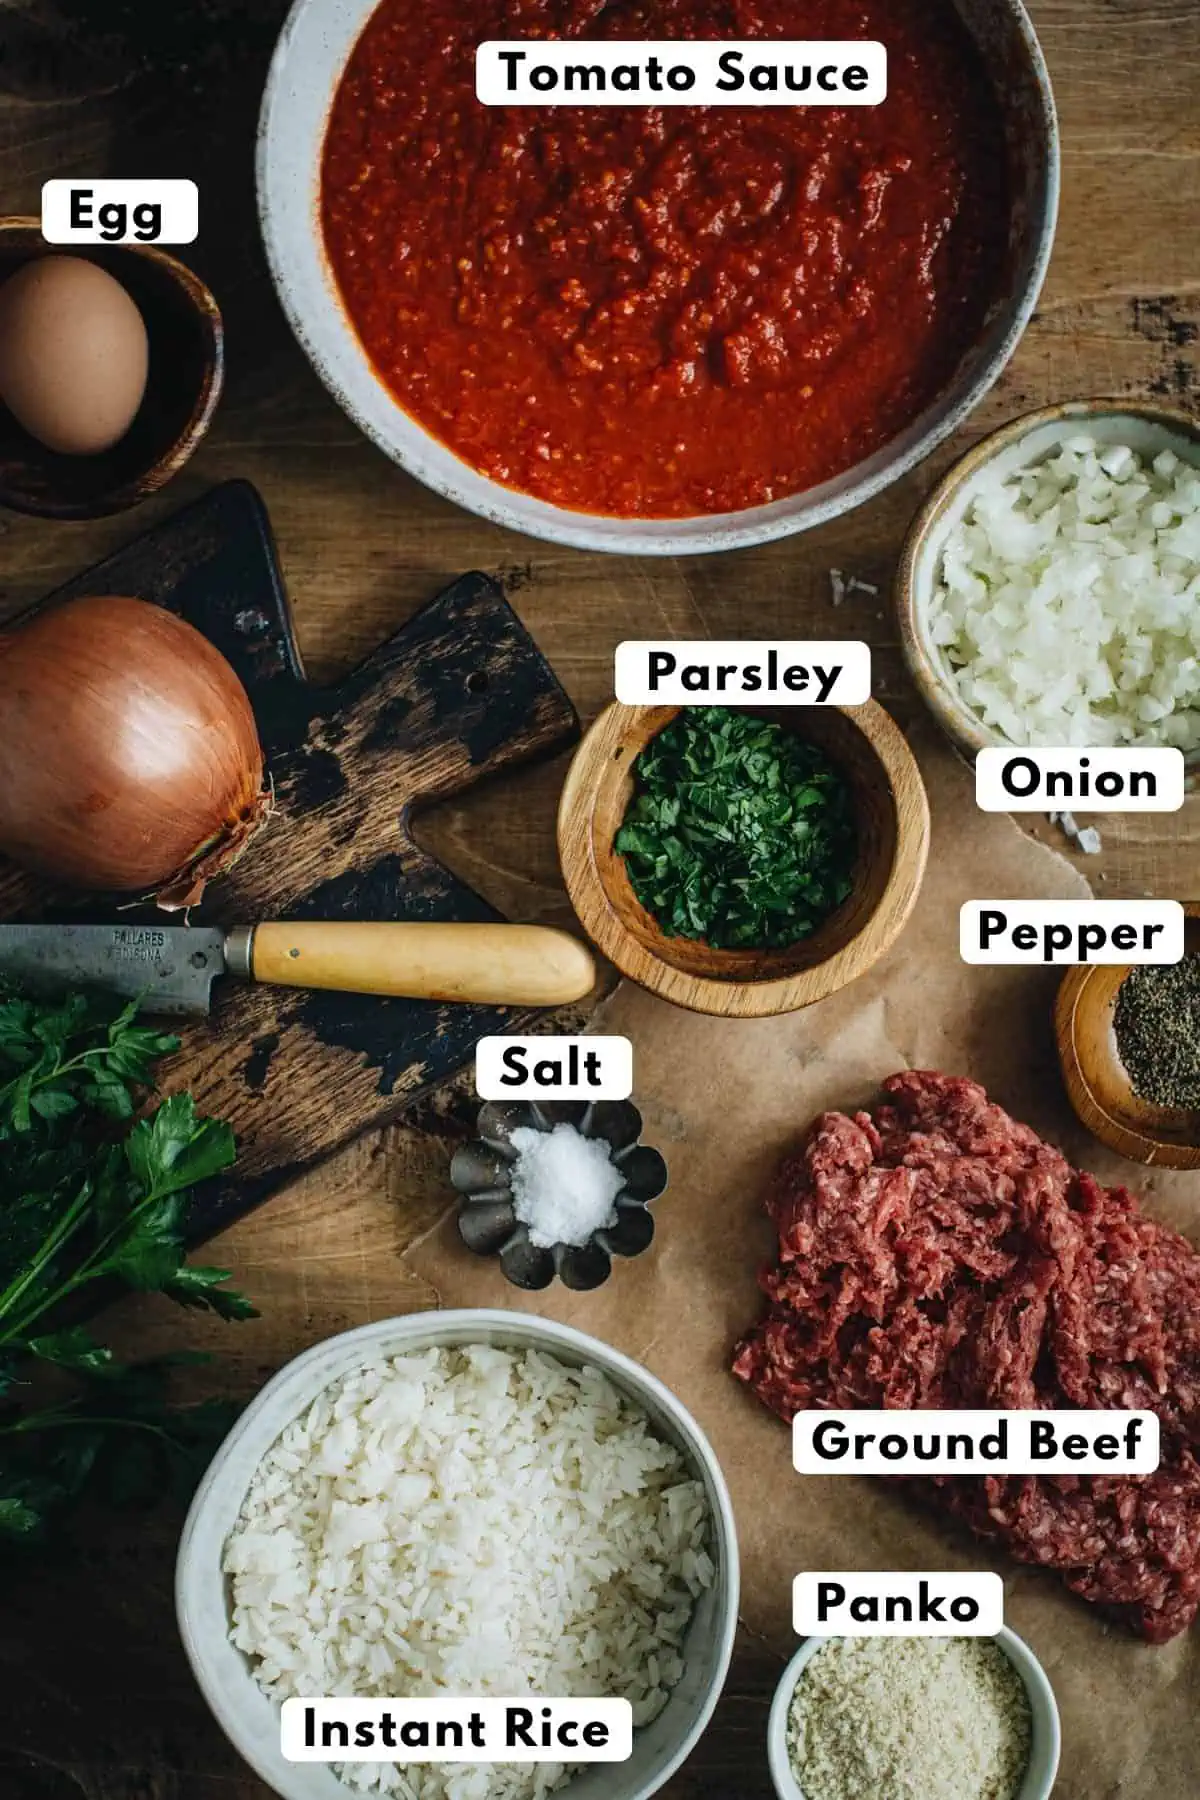 Meatballs and rice ingredients.